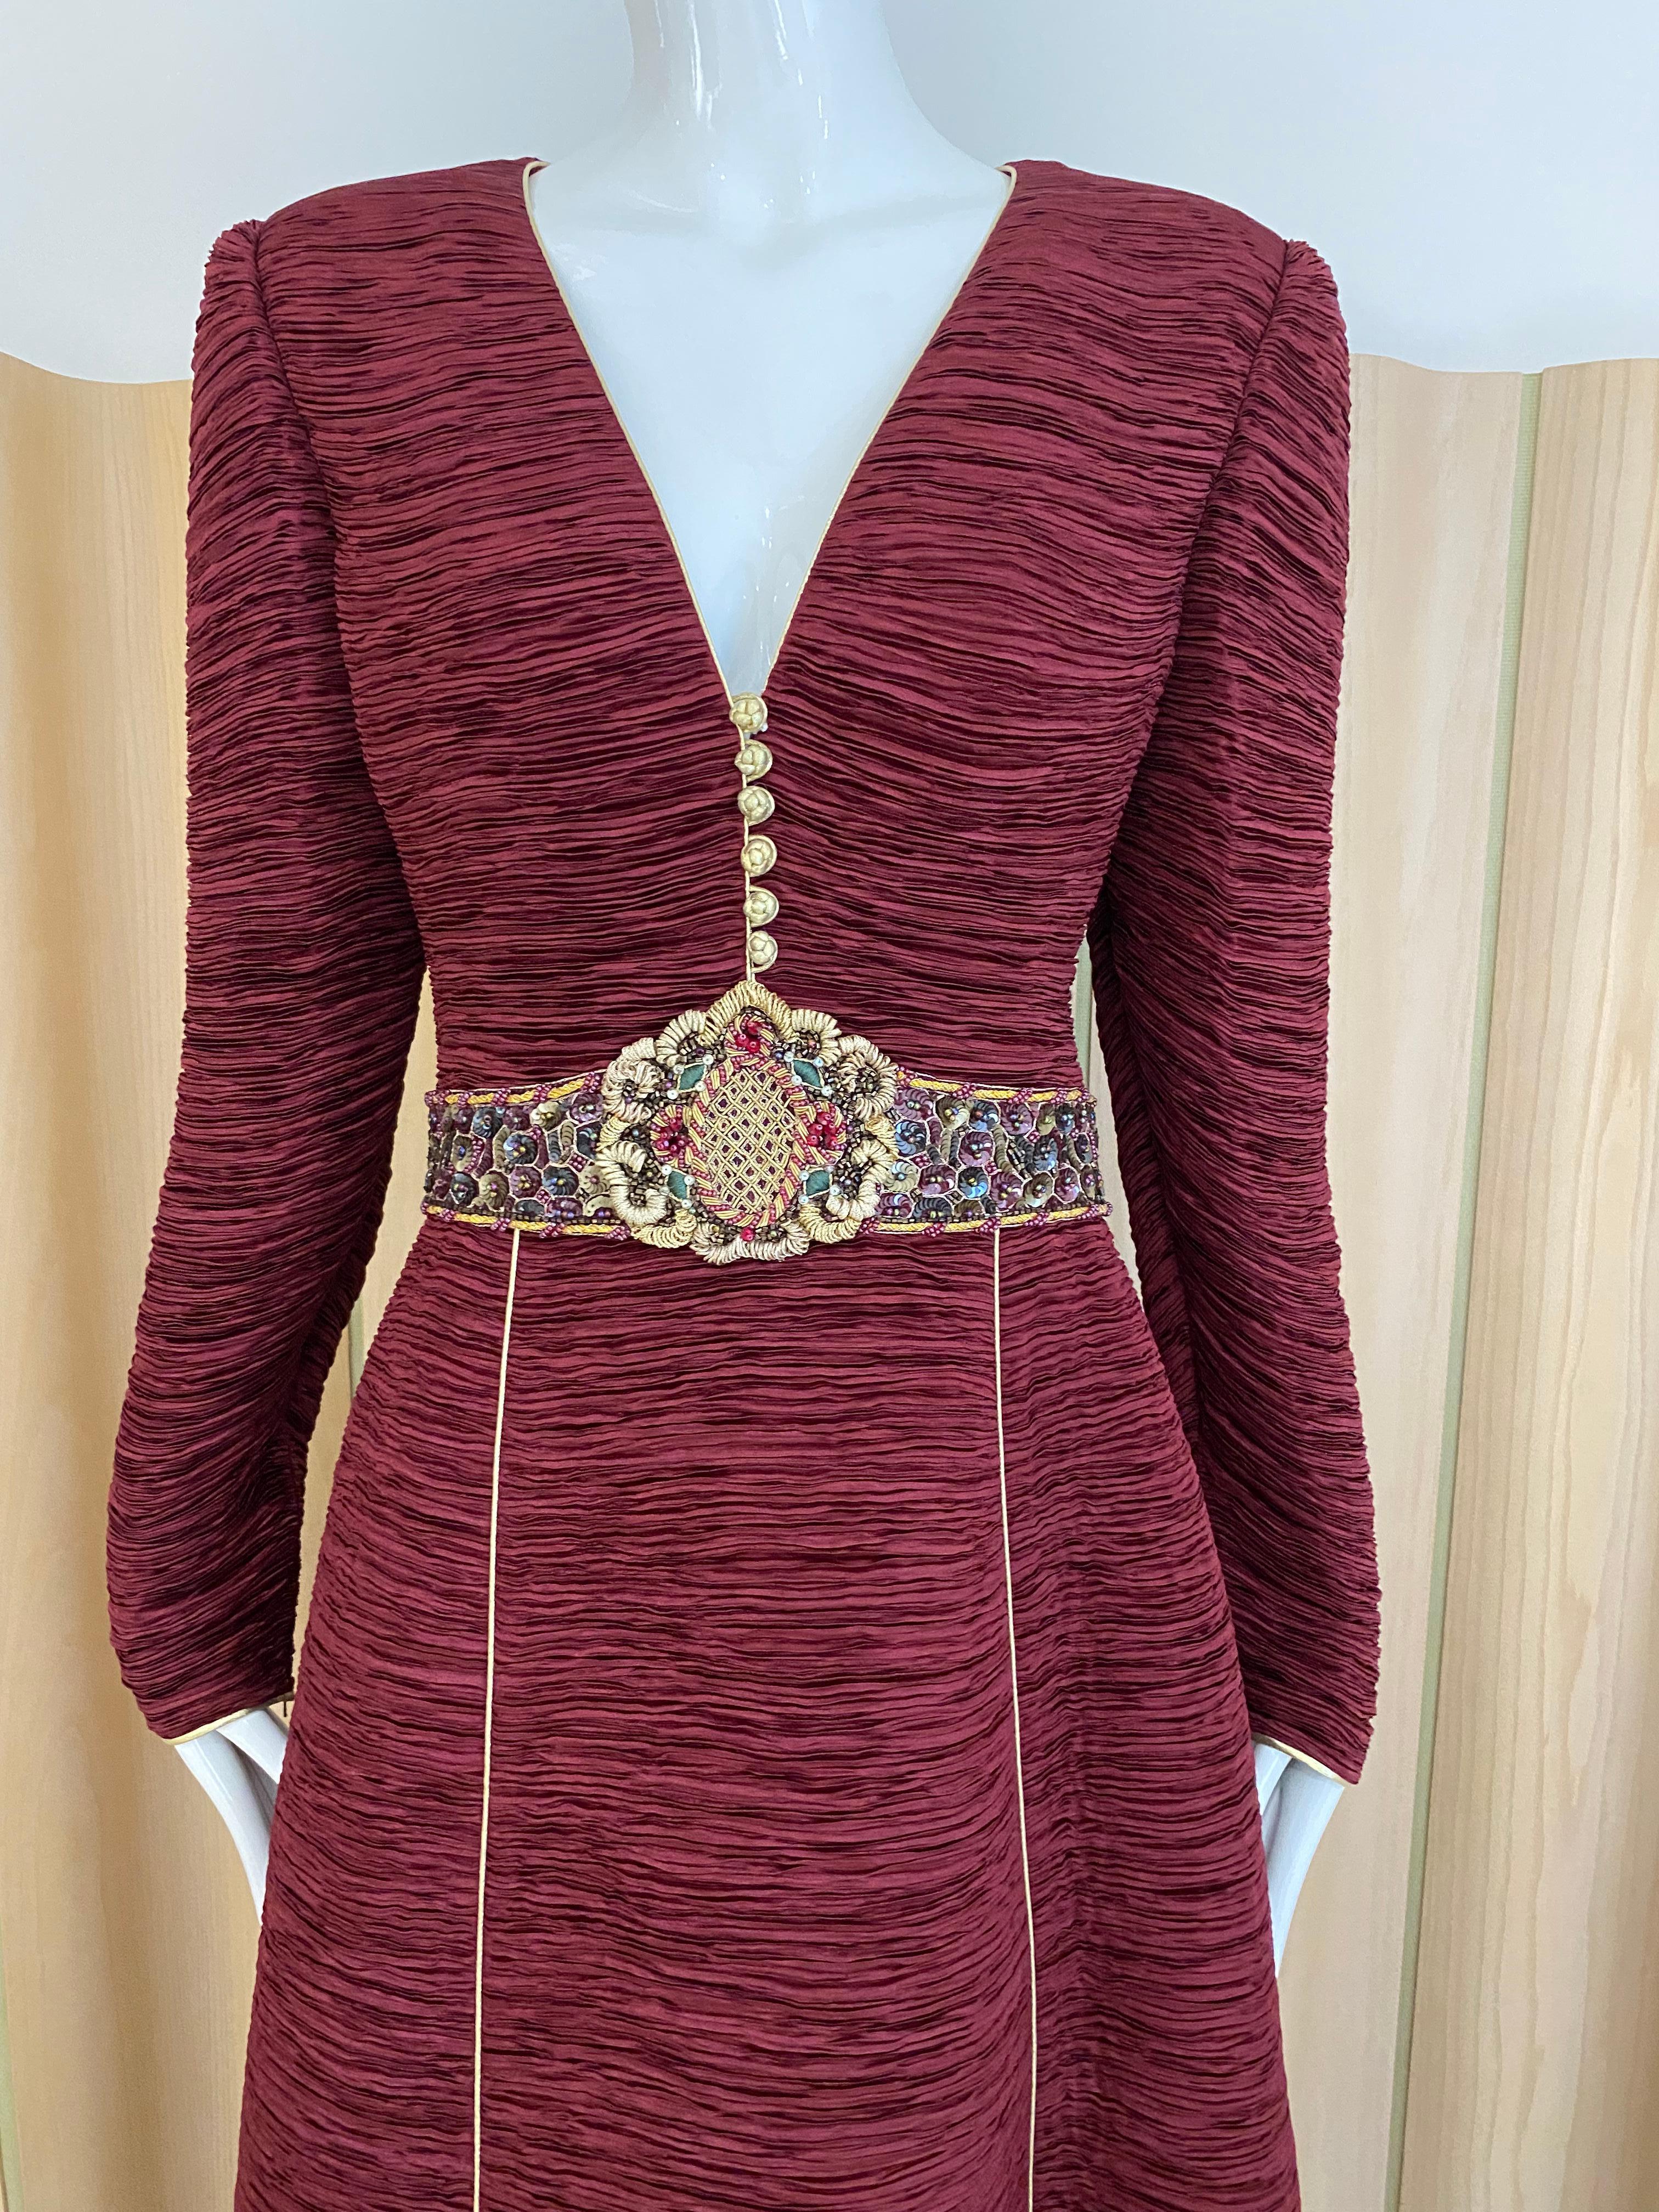 Beautiful 90s Marcy Mcfadden Couture Burgundy Long Sleeve V neck gown with gold frog closures and embellished waist. LARGE size
Measurement :
Bust: 42” / Waist: 33’ Hip: 48” / Dress Length: 60”/ Sleeve length: 26”/ Shoulder: 16.5